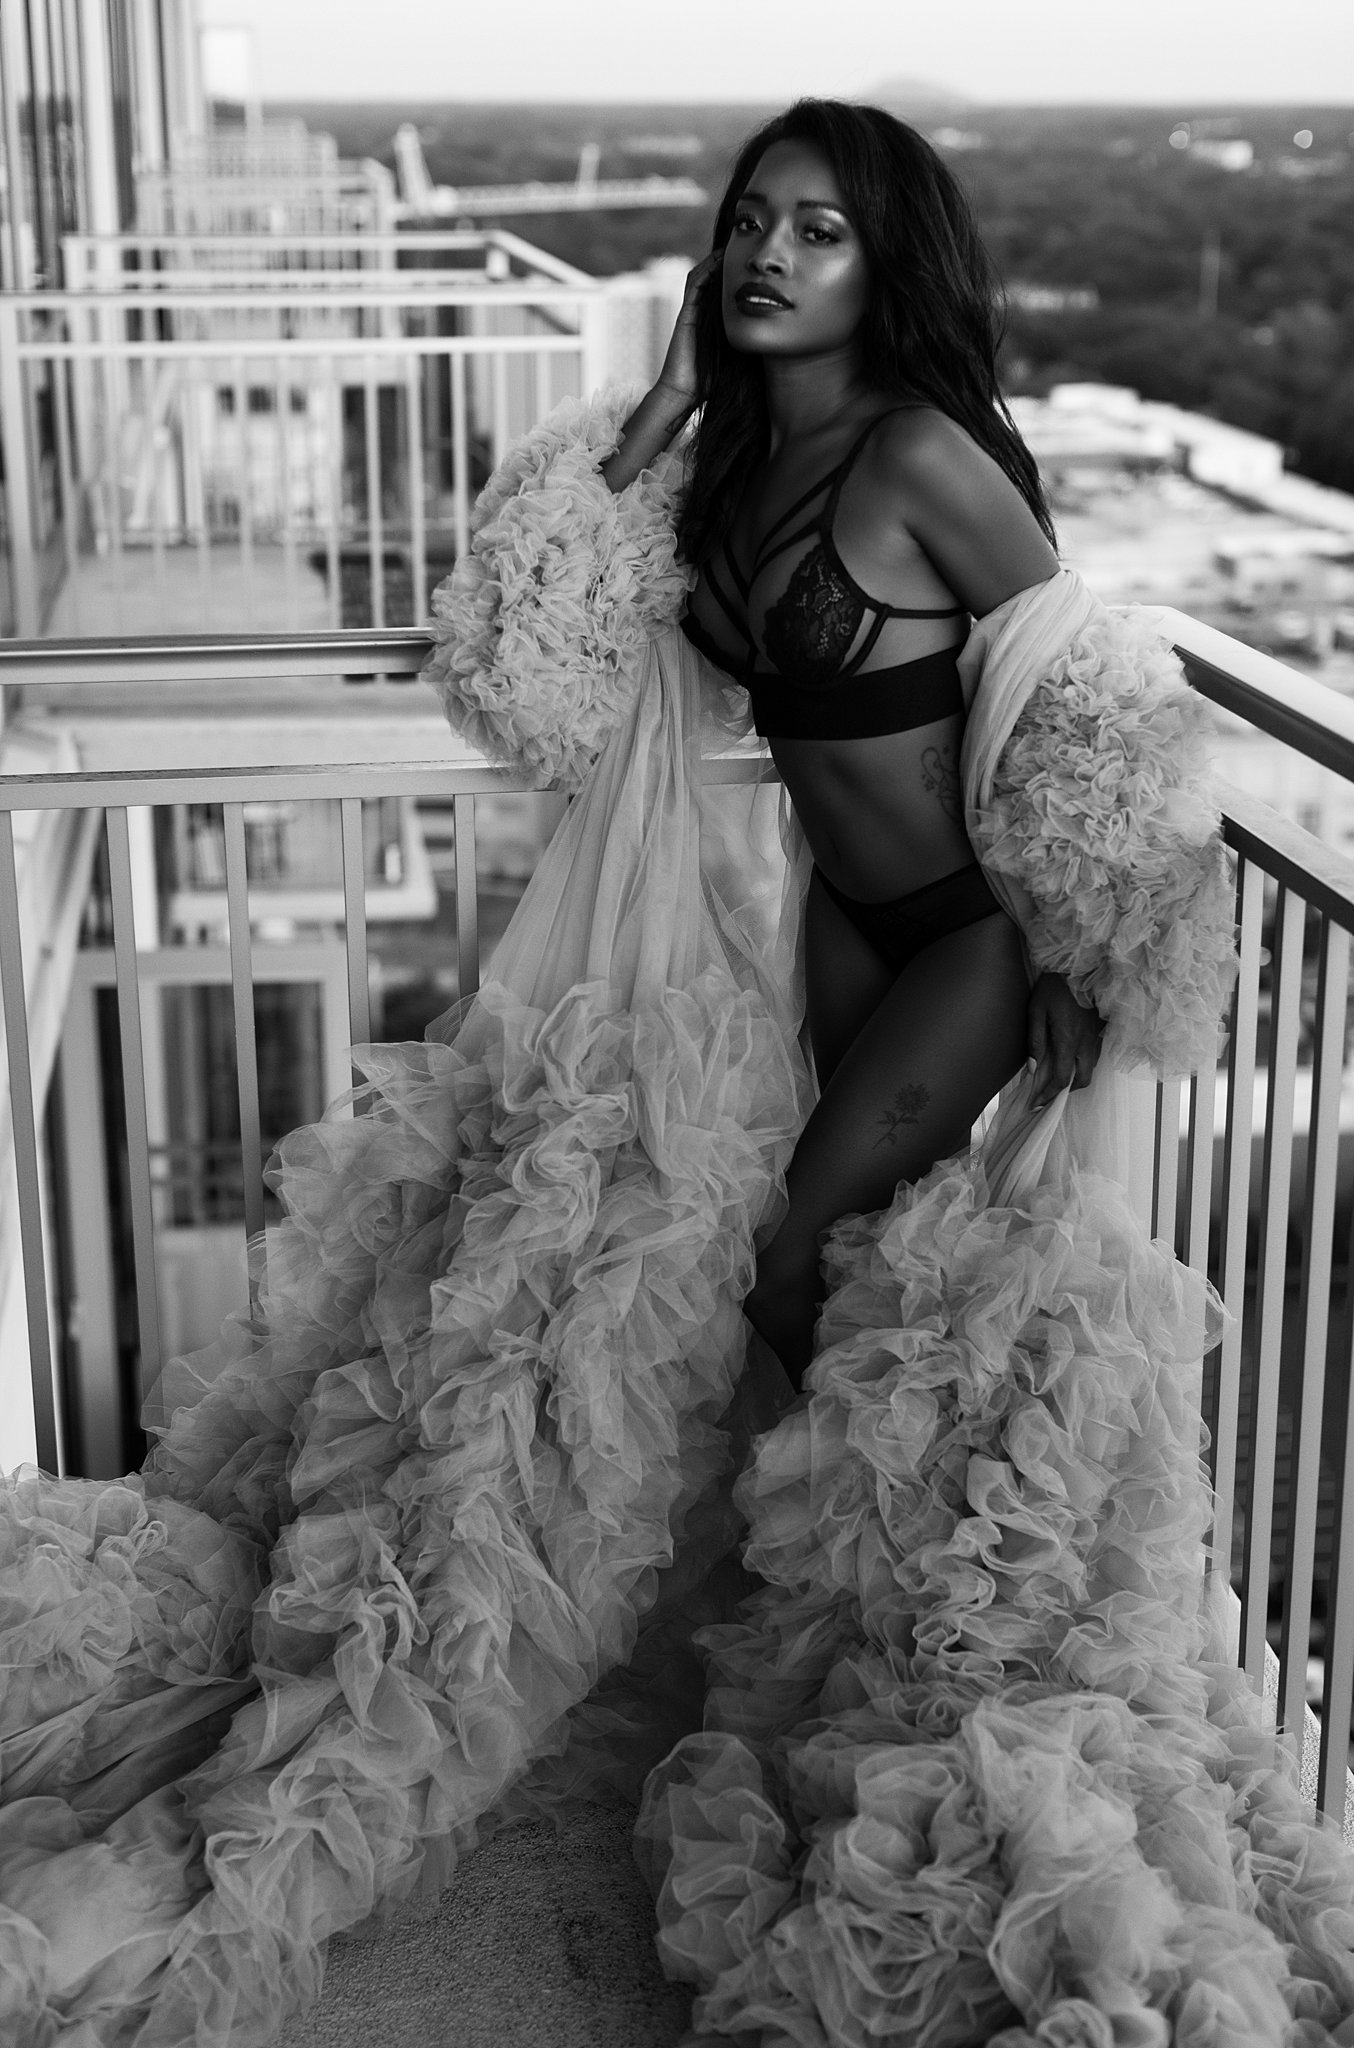 A woman in black lingerie and a tule coverup leans on the railing of a balcony massageluxe miami